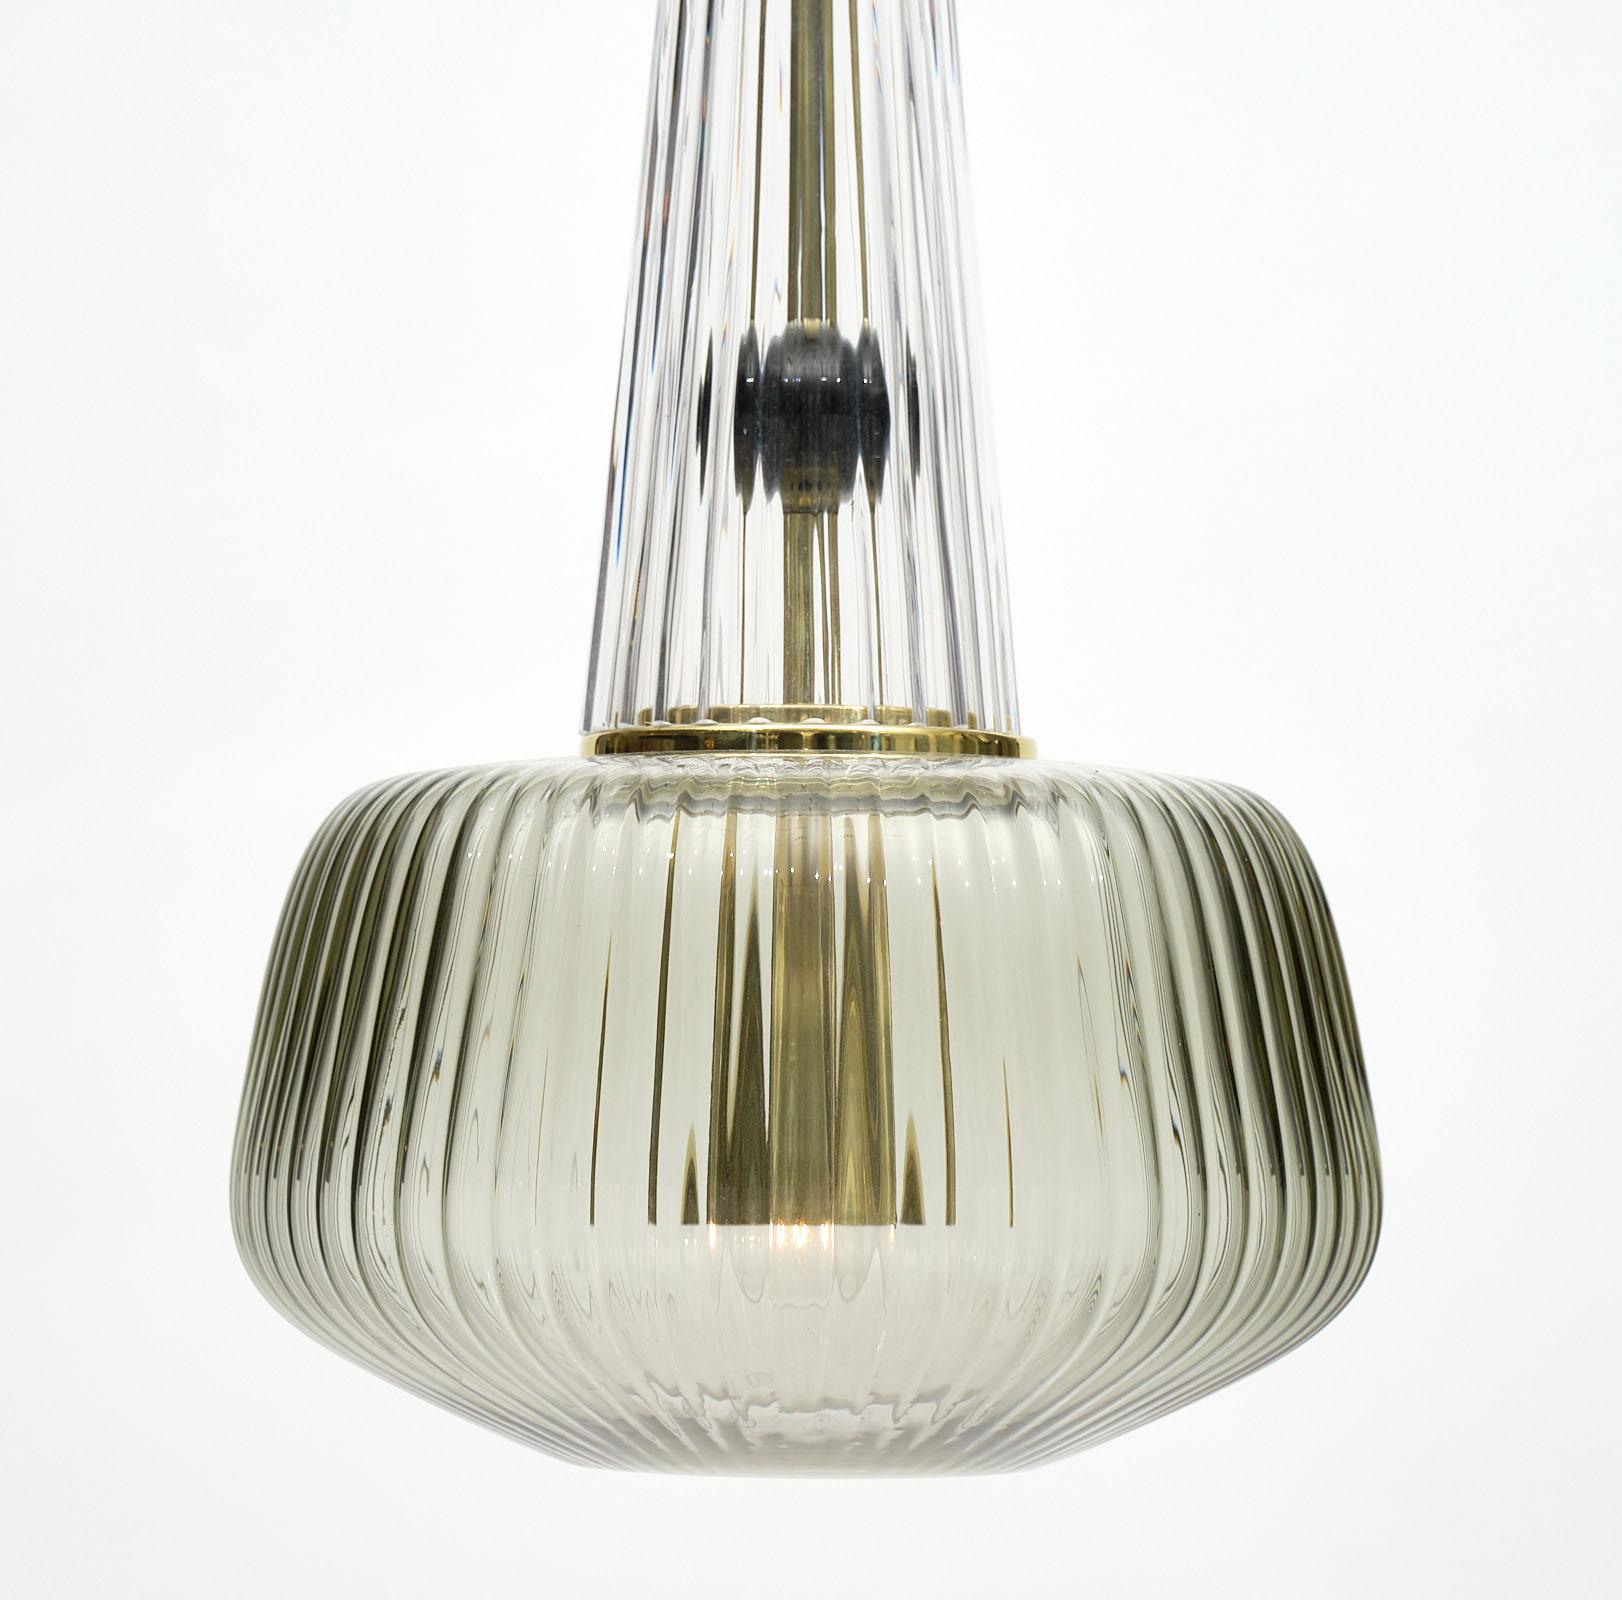 Set of Murano glass ridged pendants in the style of Ettore Sottsass. We have two sets of these beautiful fixtures available and each includes a green fixture, a smoke fixture, and a pink fixture. They have been newly wired to fit US standards. The